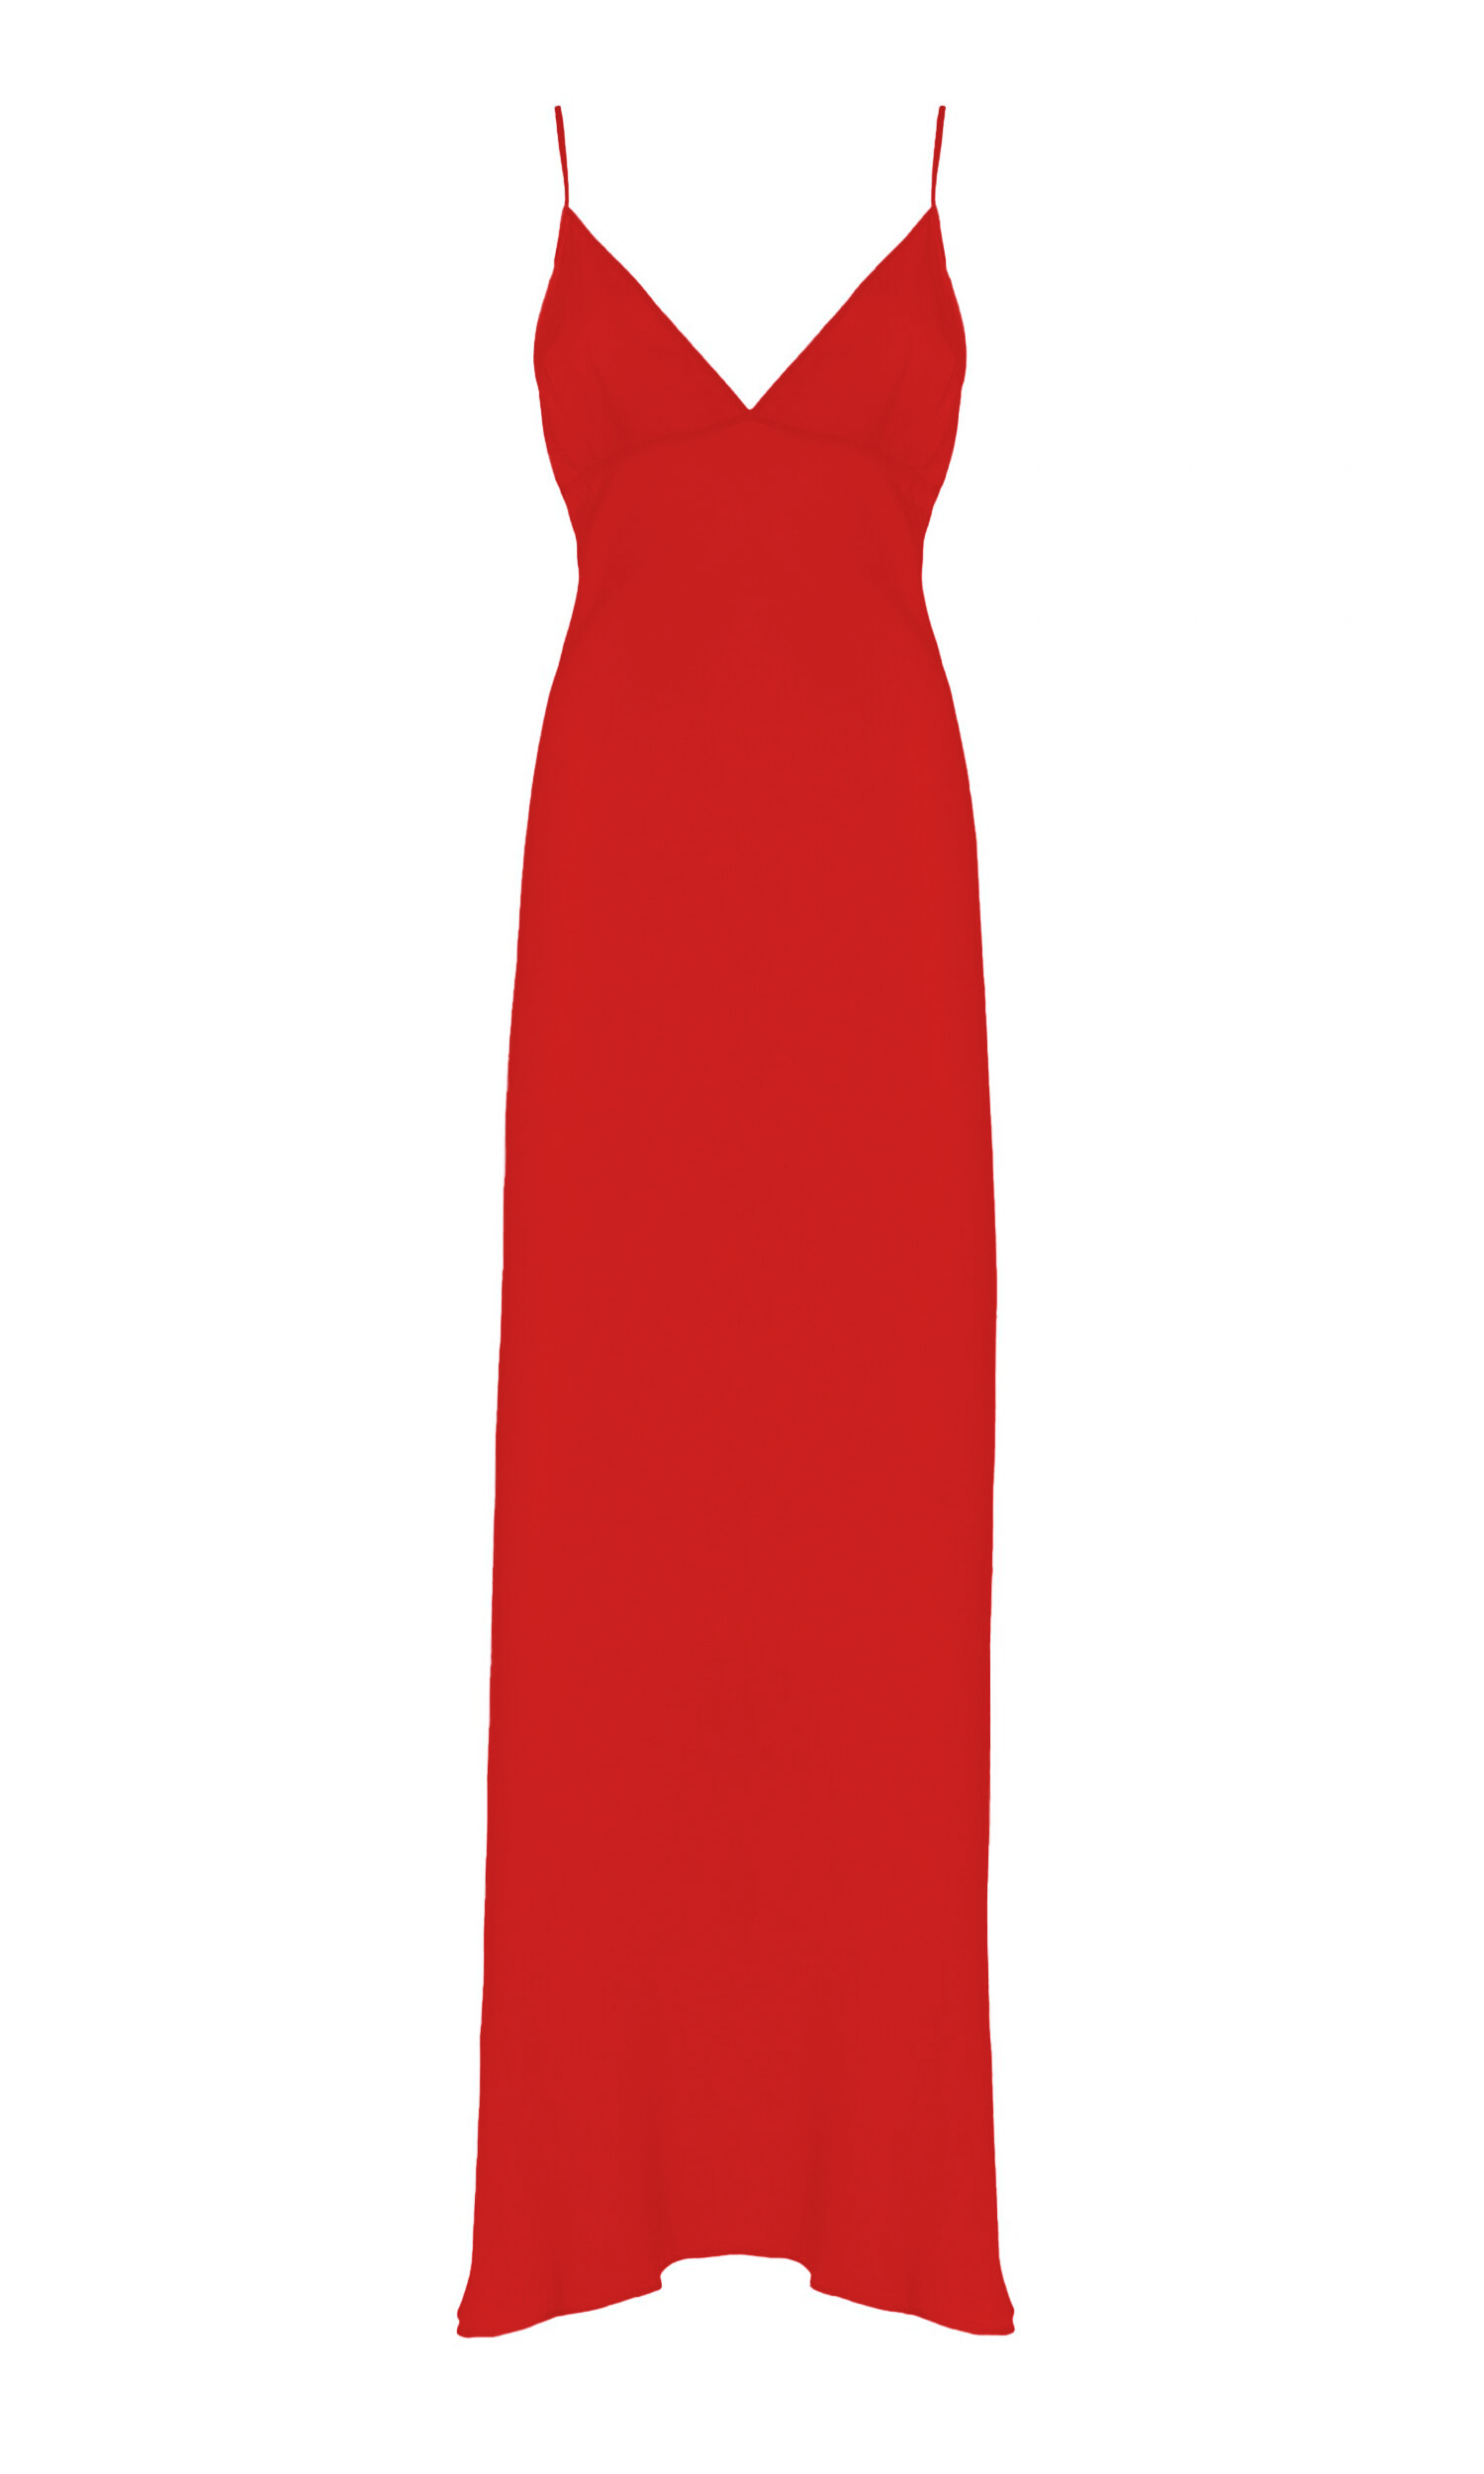 DRESS 2 RED FRONT